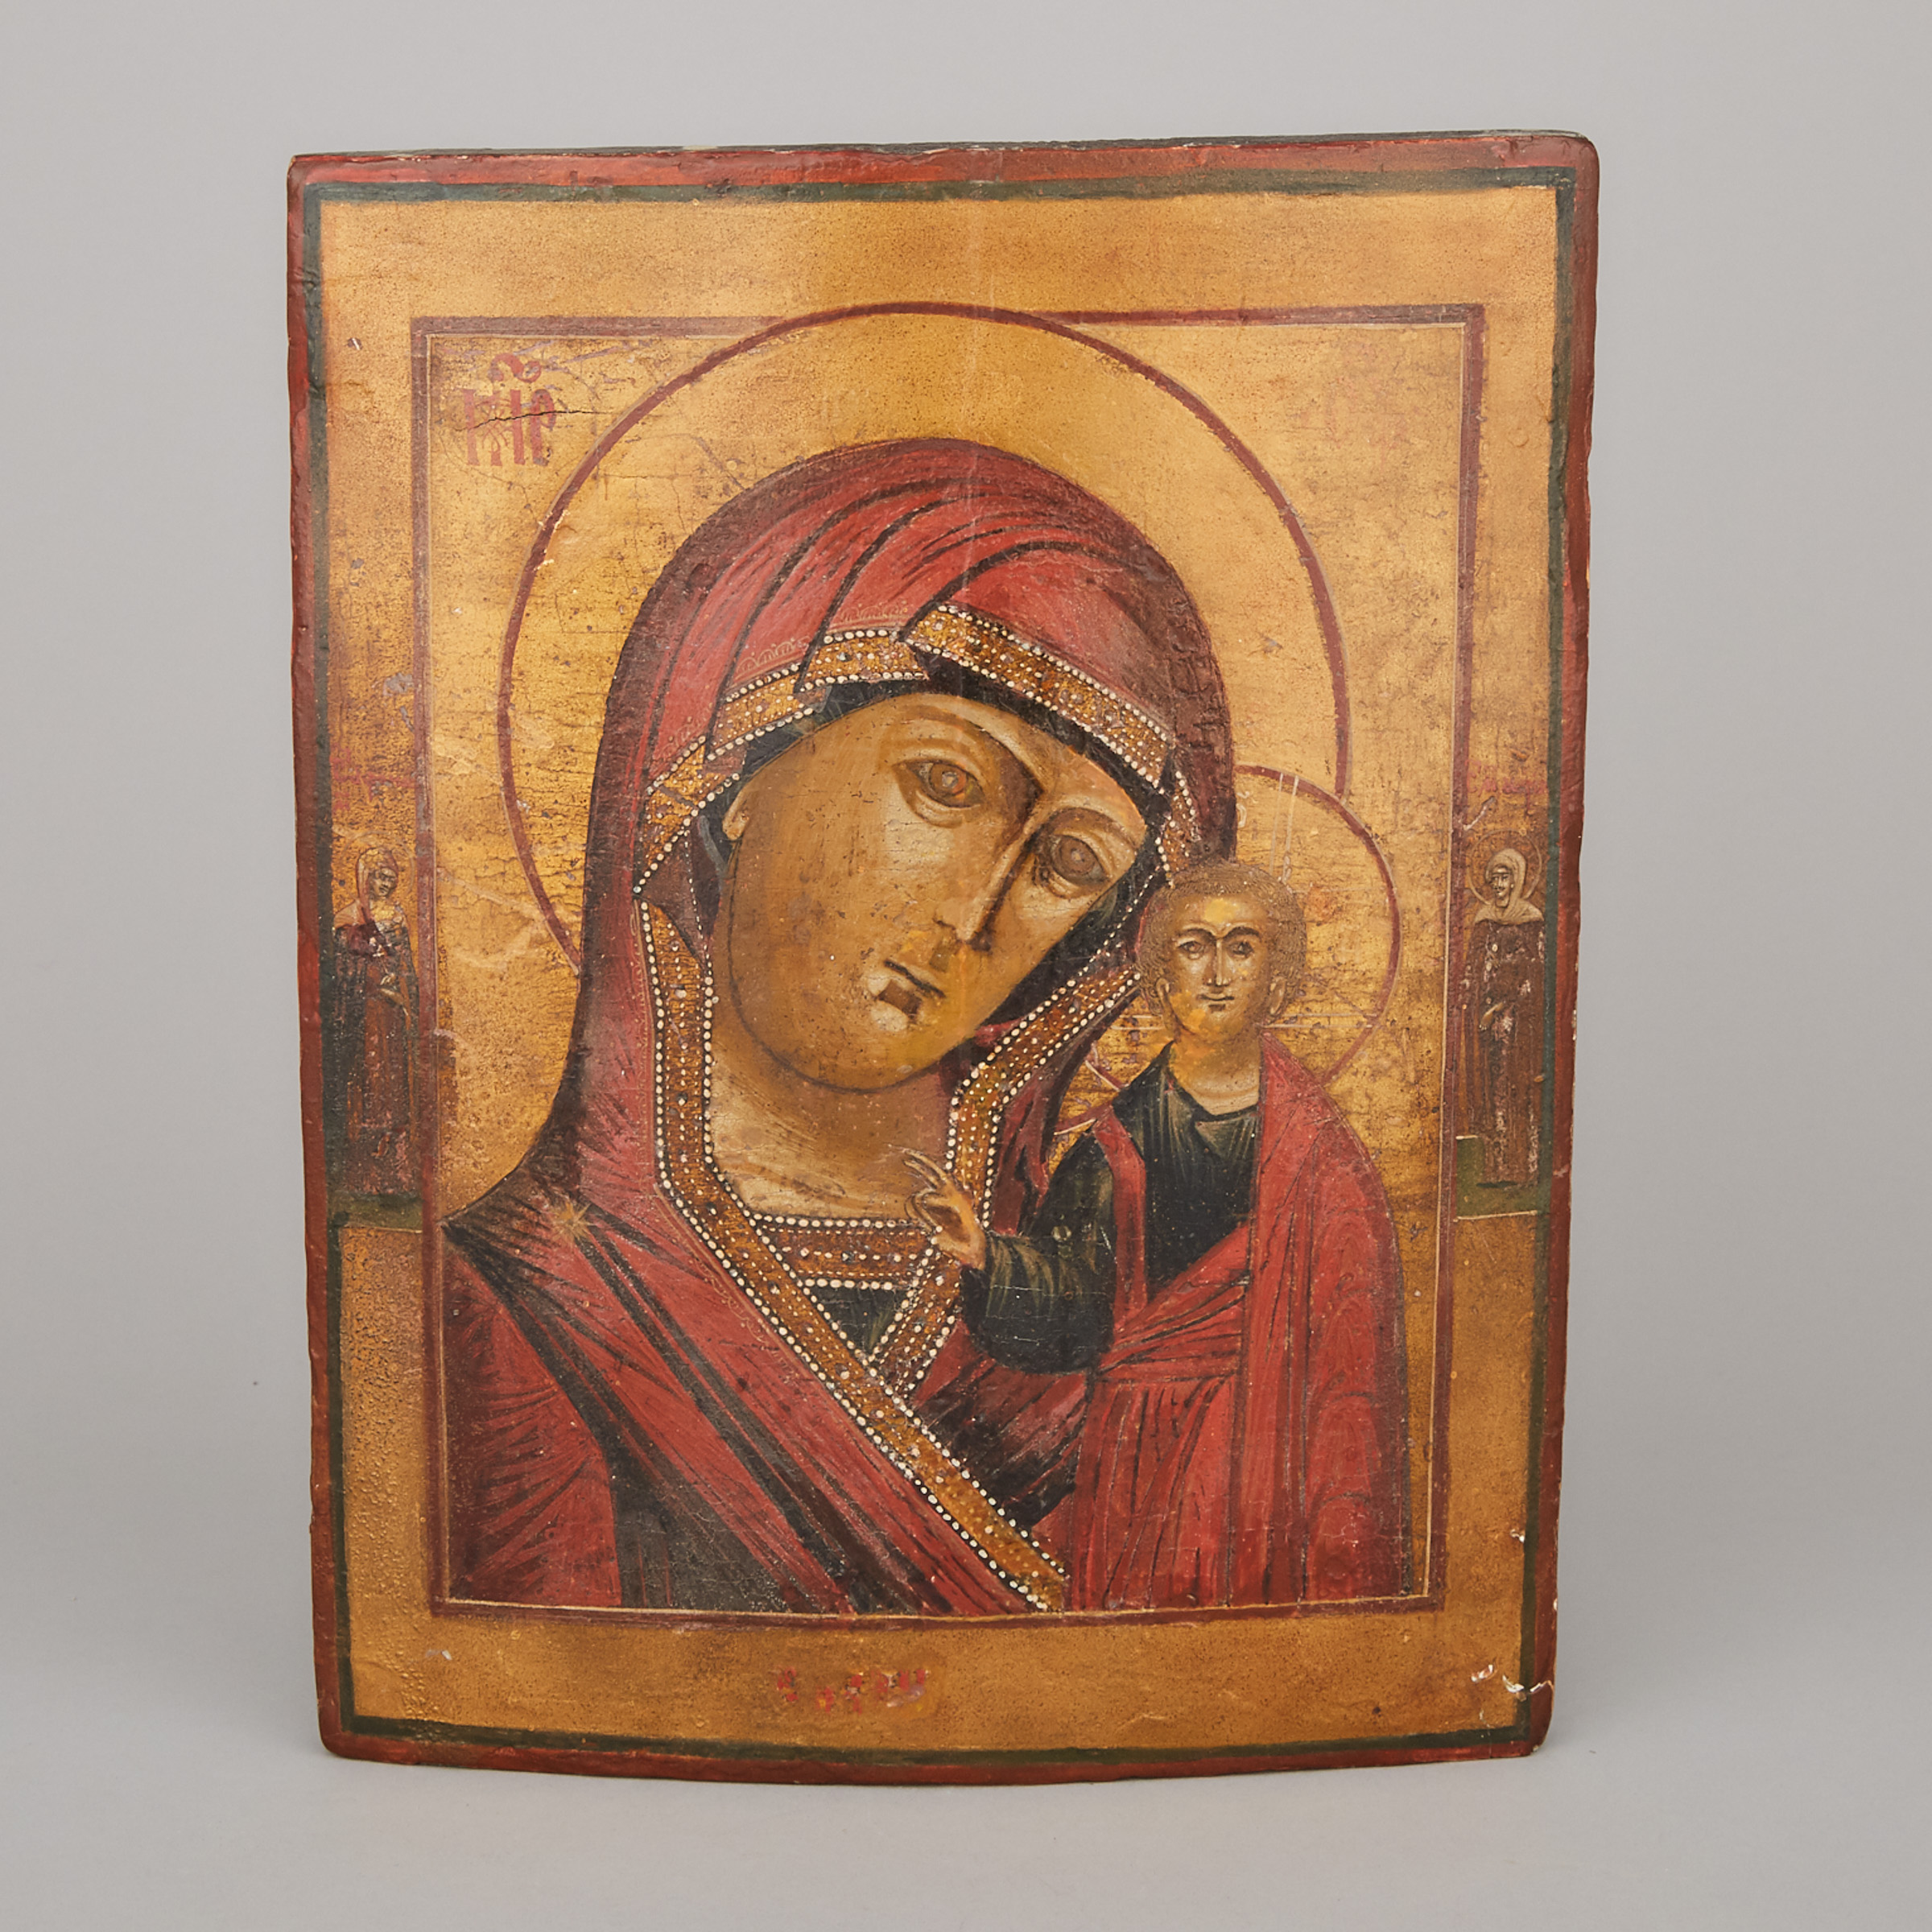 Russian Orthodox Our Lady of Kazan Icon, 19th century